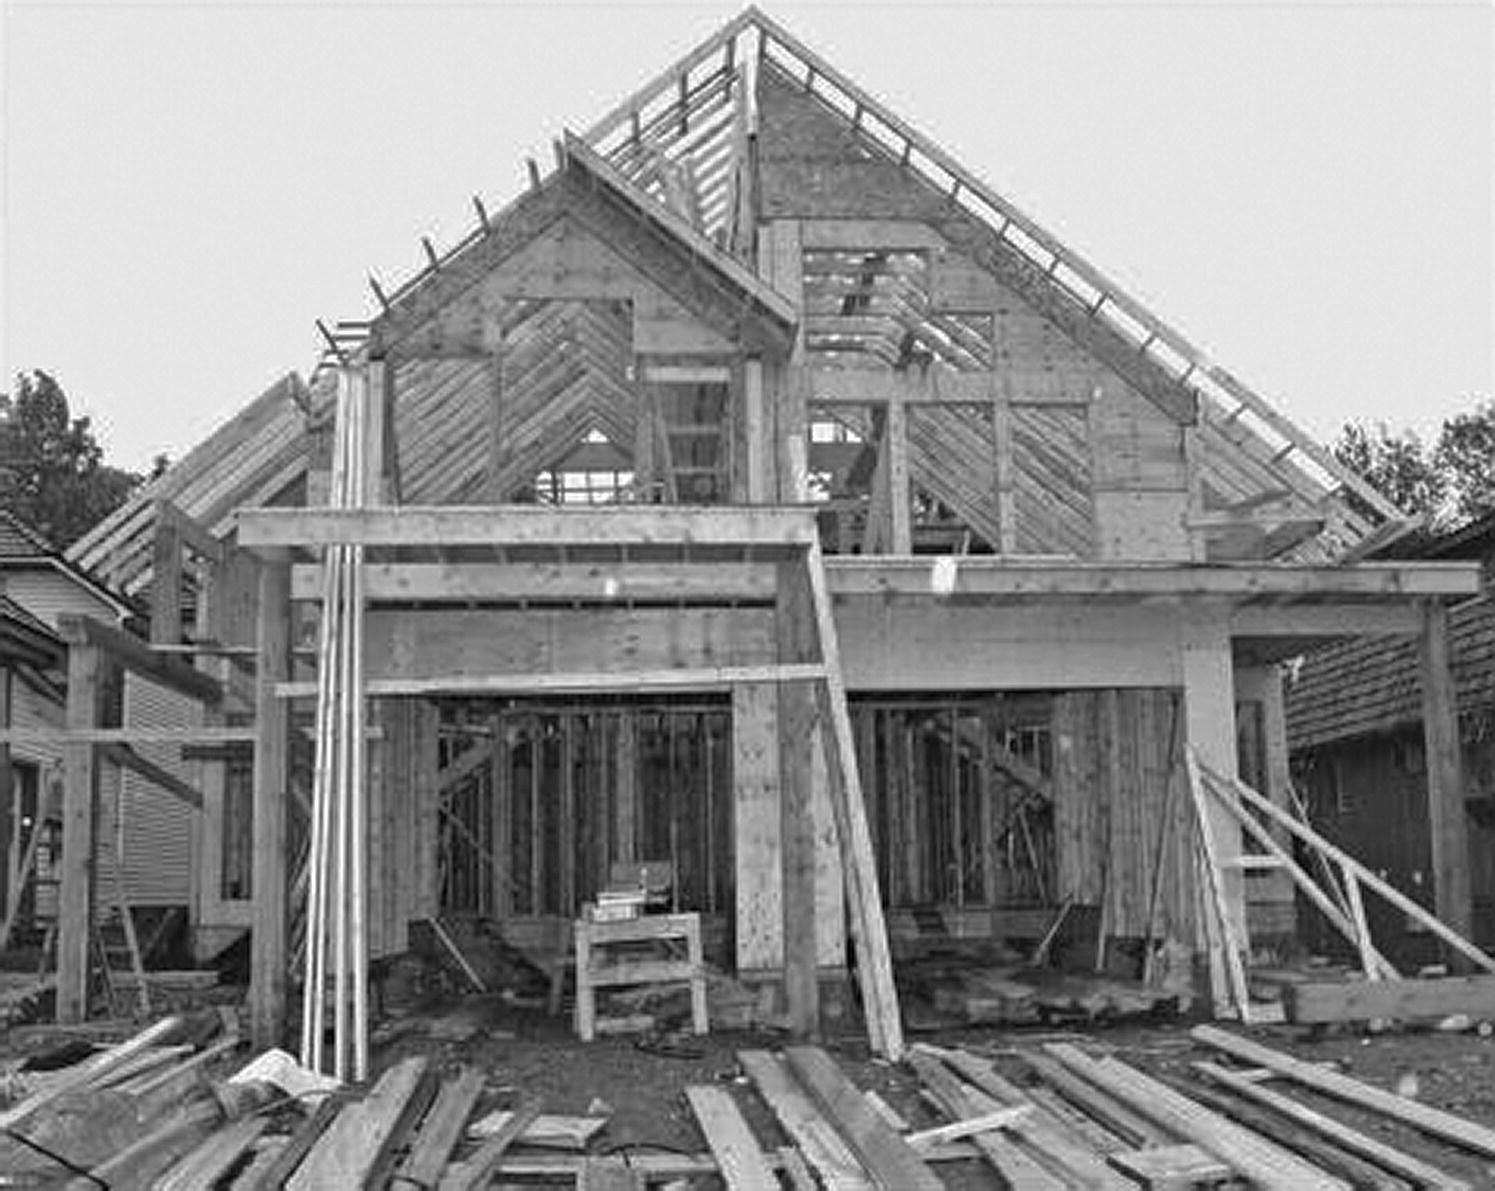 Photo of a self‐build timber frame house under construction.